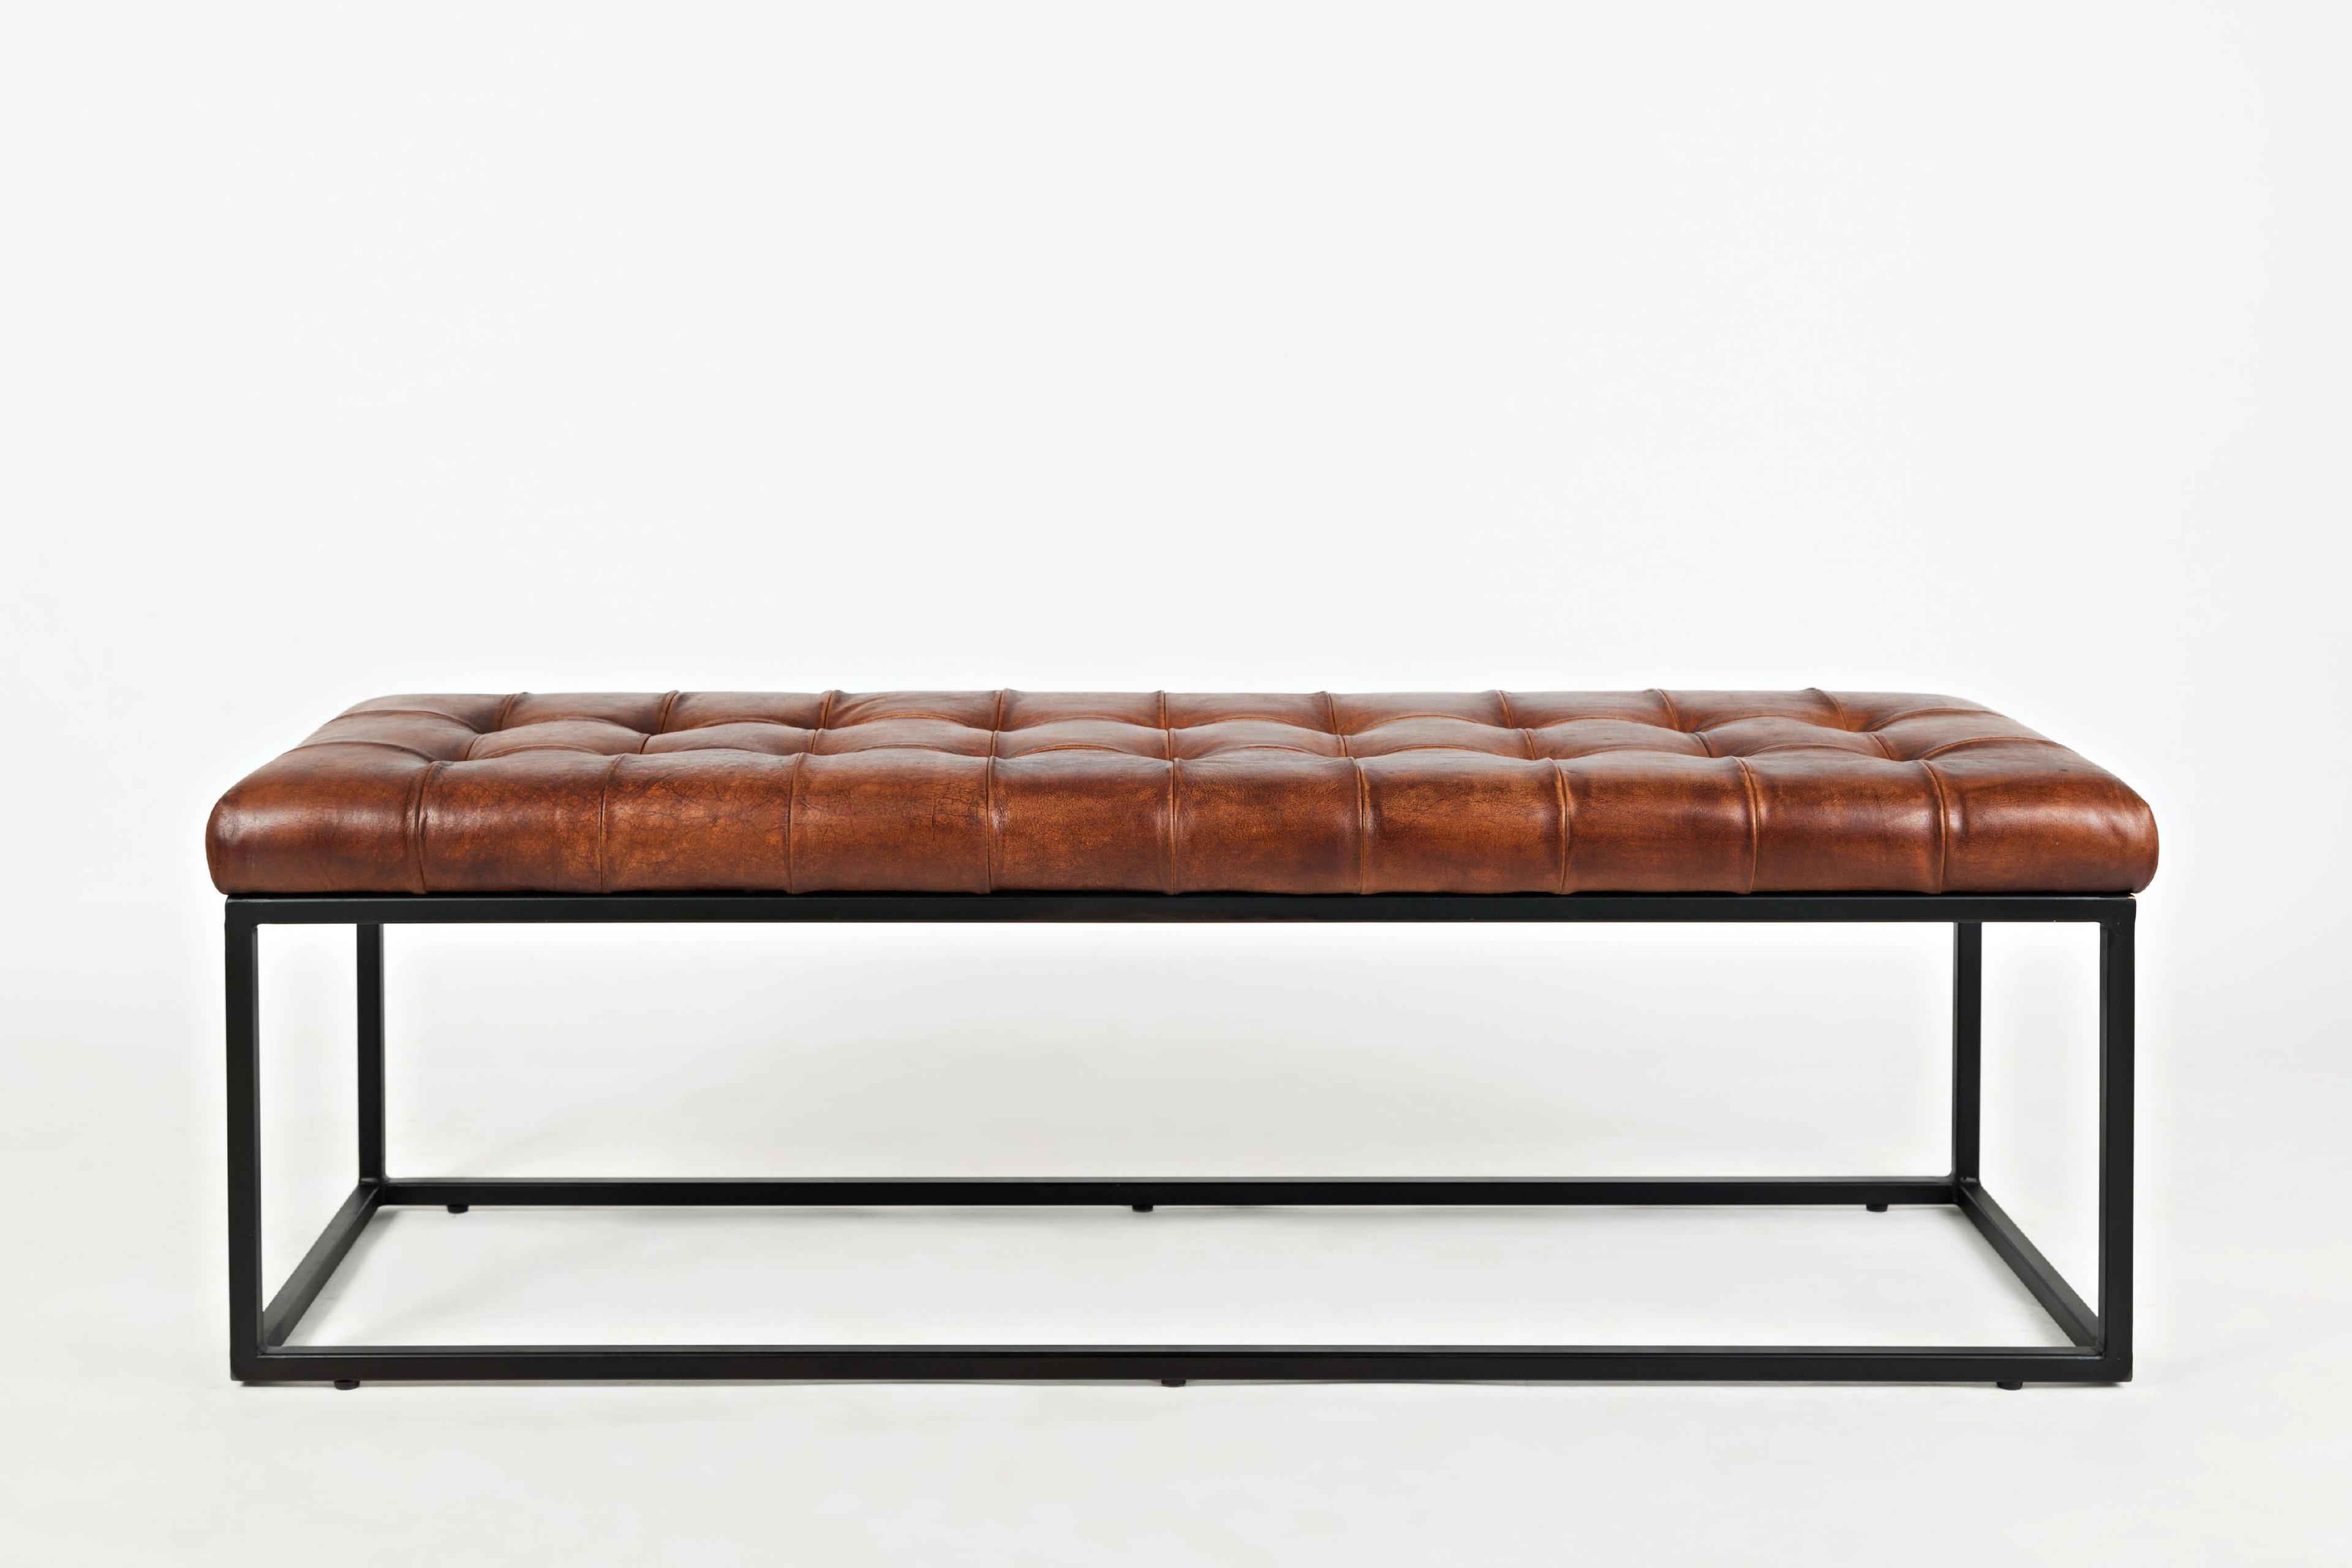 Transitional 55" Tufted Brown Leather Ottoman Bench with Metal Frame